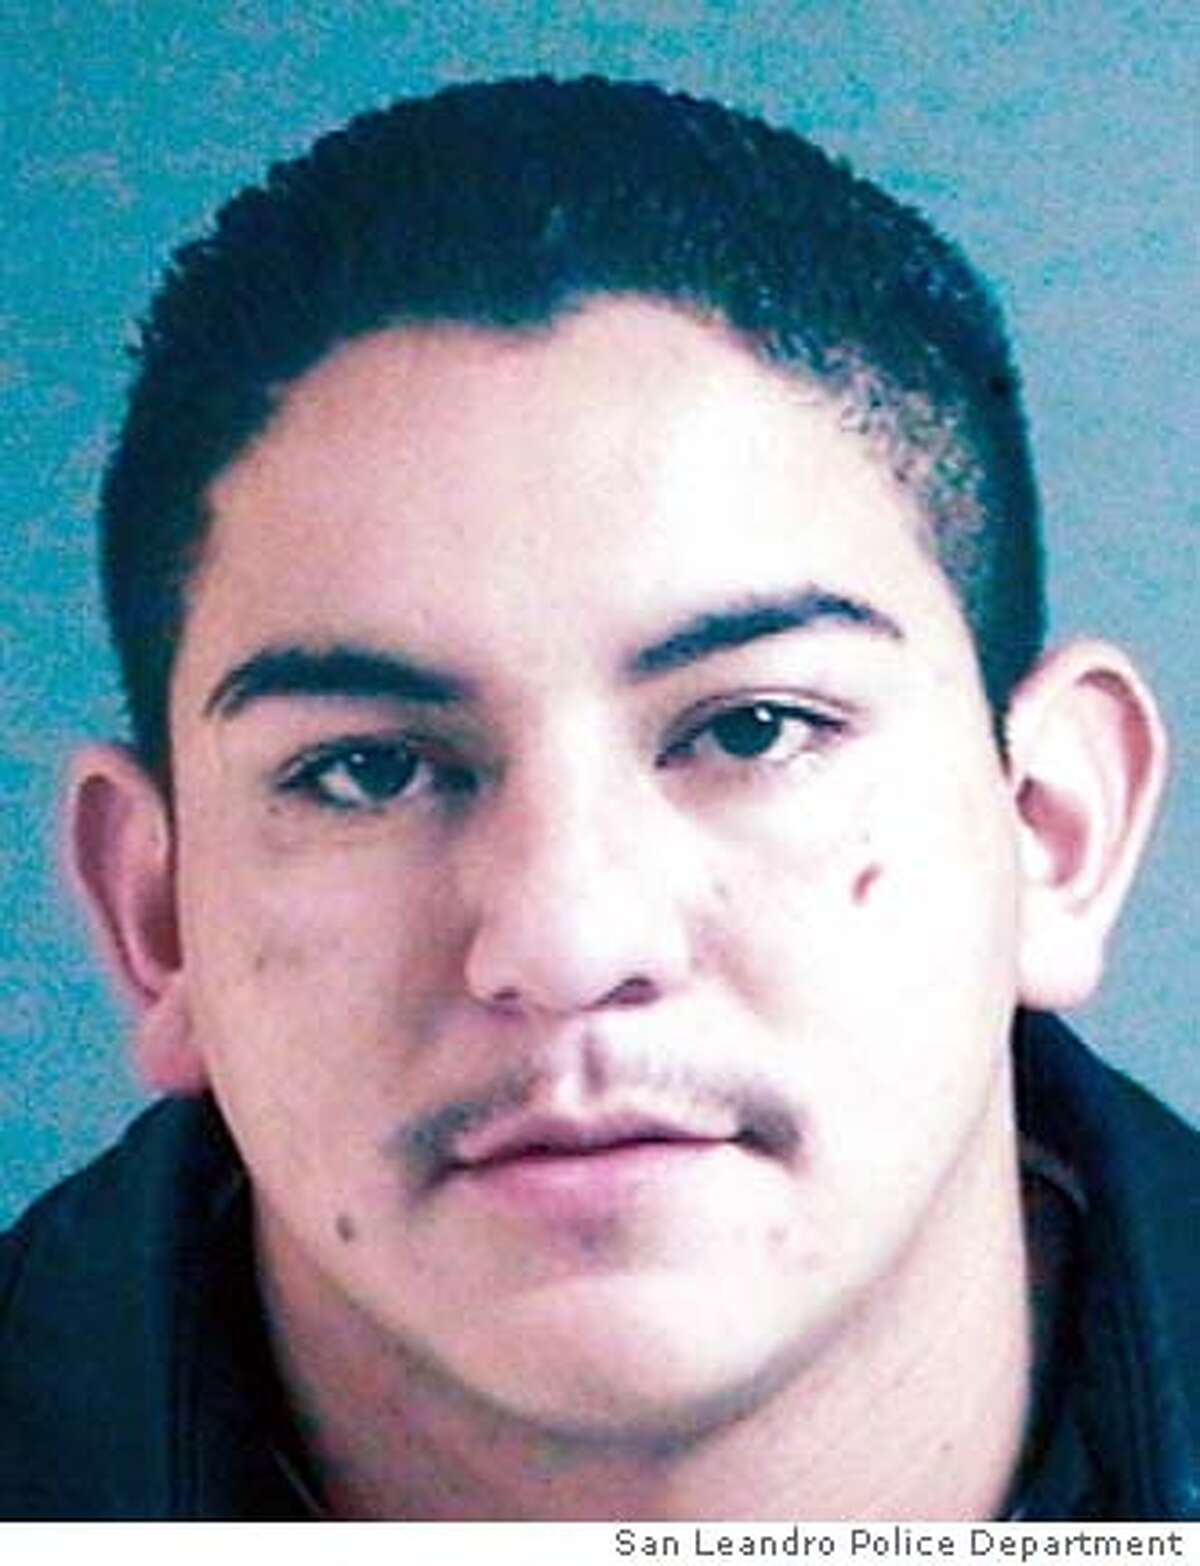 Copy of photo of Irving �Gotti� Ramirez, 23, of Newark, wanted for the murder of Officer Nels "Dan" Niemi. A statewide manhunt is under way this morning for a man who shot and killed San Leandro police officer Nels "Dan" Niemi Monday night in what investigators described as an unprovoked ambush. Police said they are looking for Irving �Gotti� Ramirez, 23, of Newark in connection with the city�s first killing of a police officer in recent memory. The 42-year-old officer, was shot shortly before 11 p.m. Monday in the 14700 block of Doolittle Drive in San Leandro.